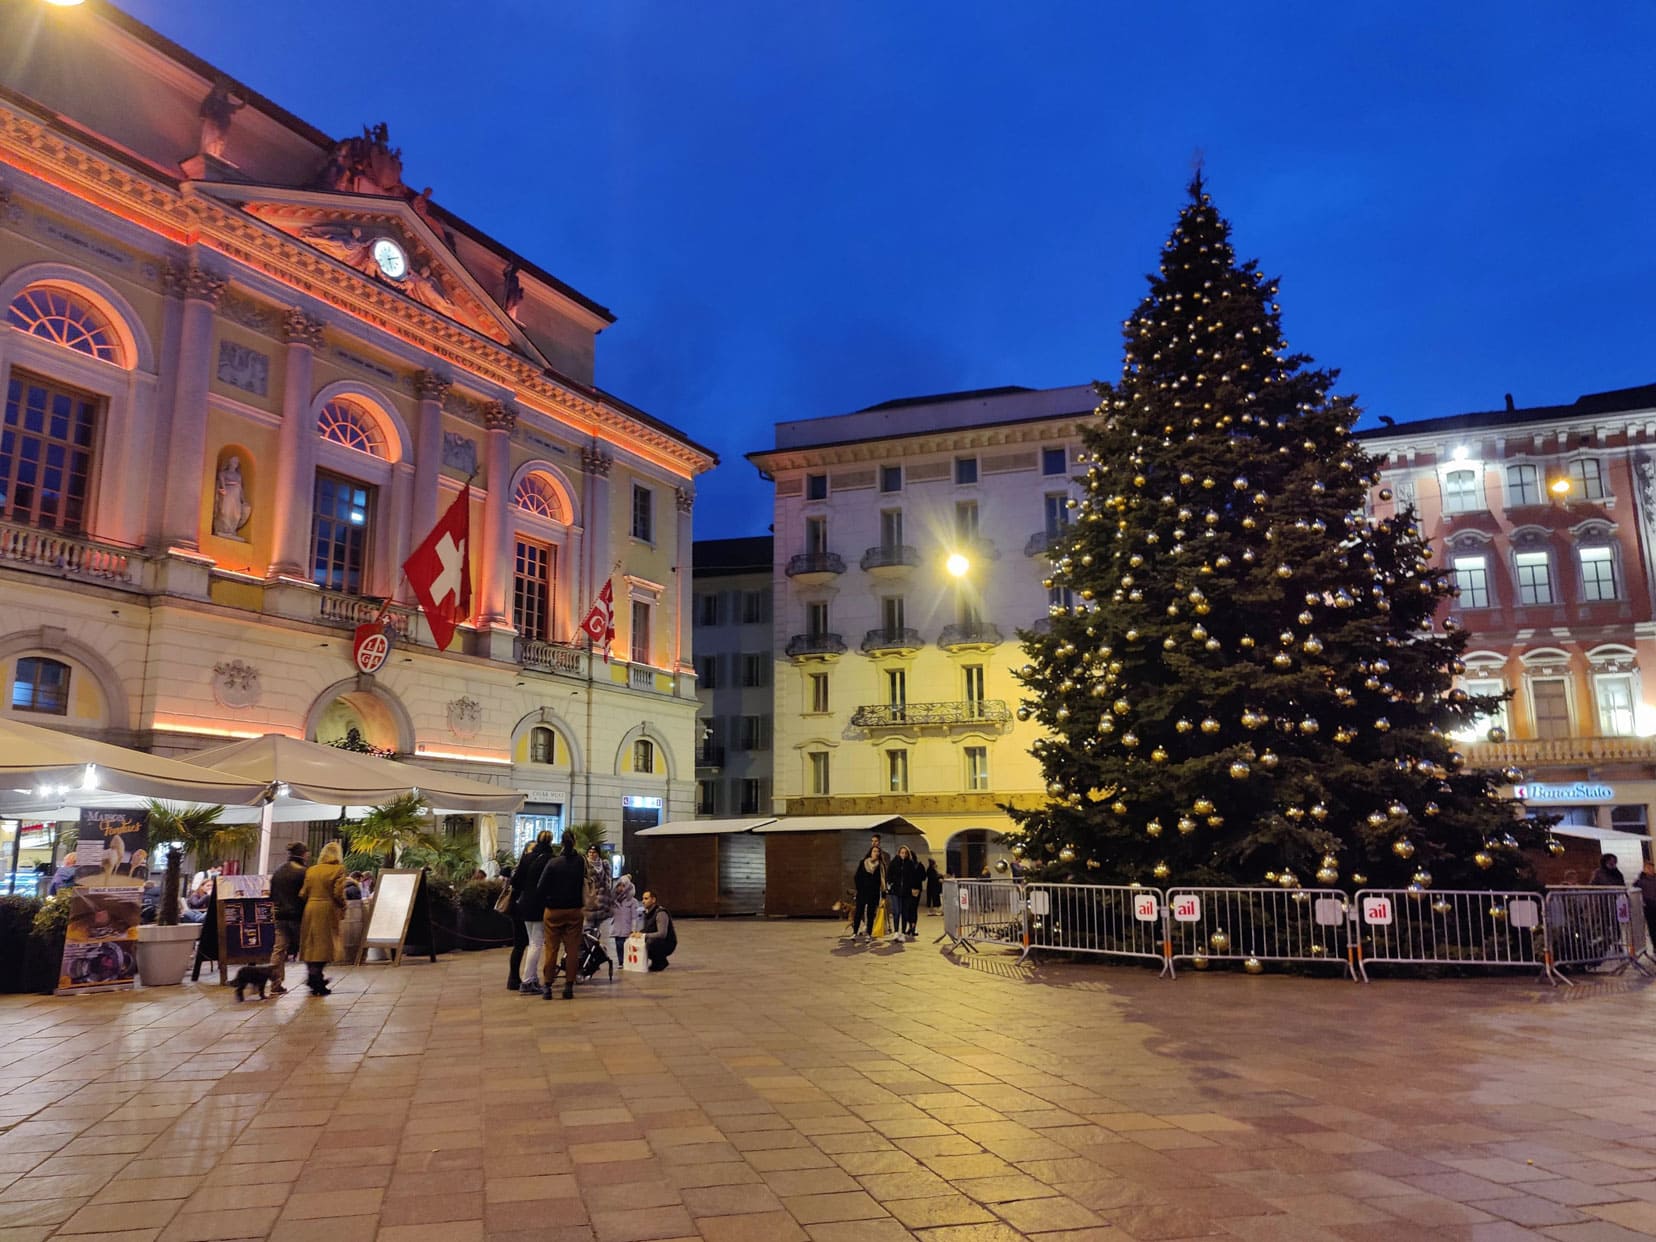 Christmas tree in Lugano in an open square surrounded by buildings